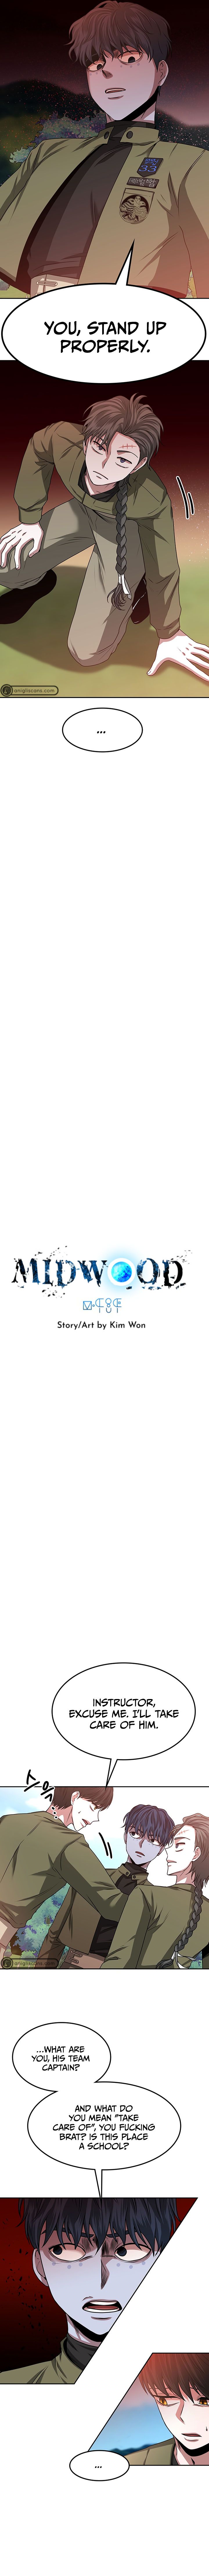 Midwood chapter 9 - page 4